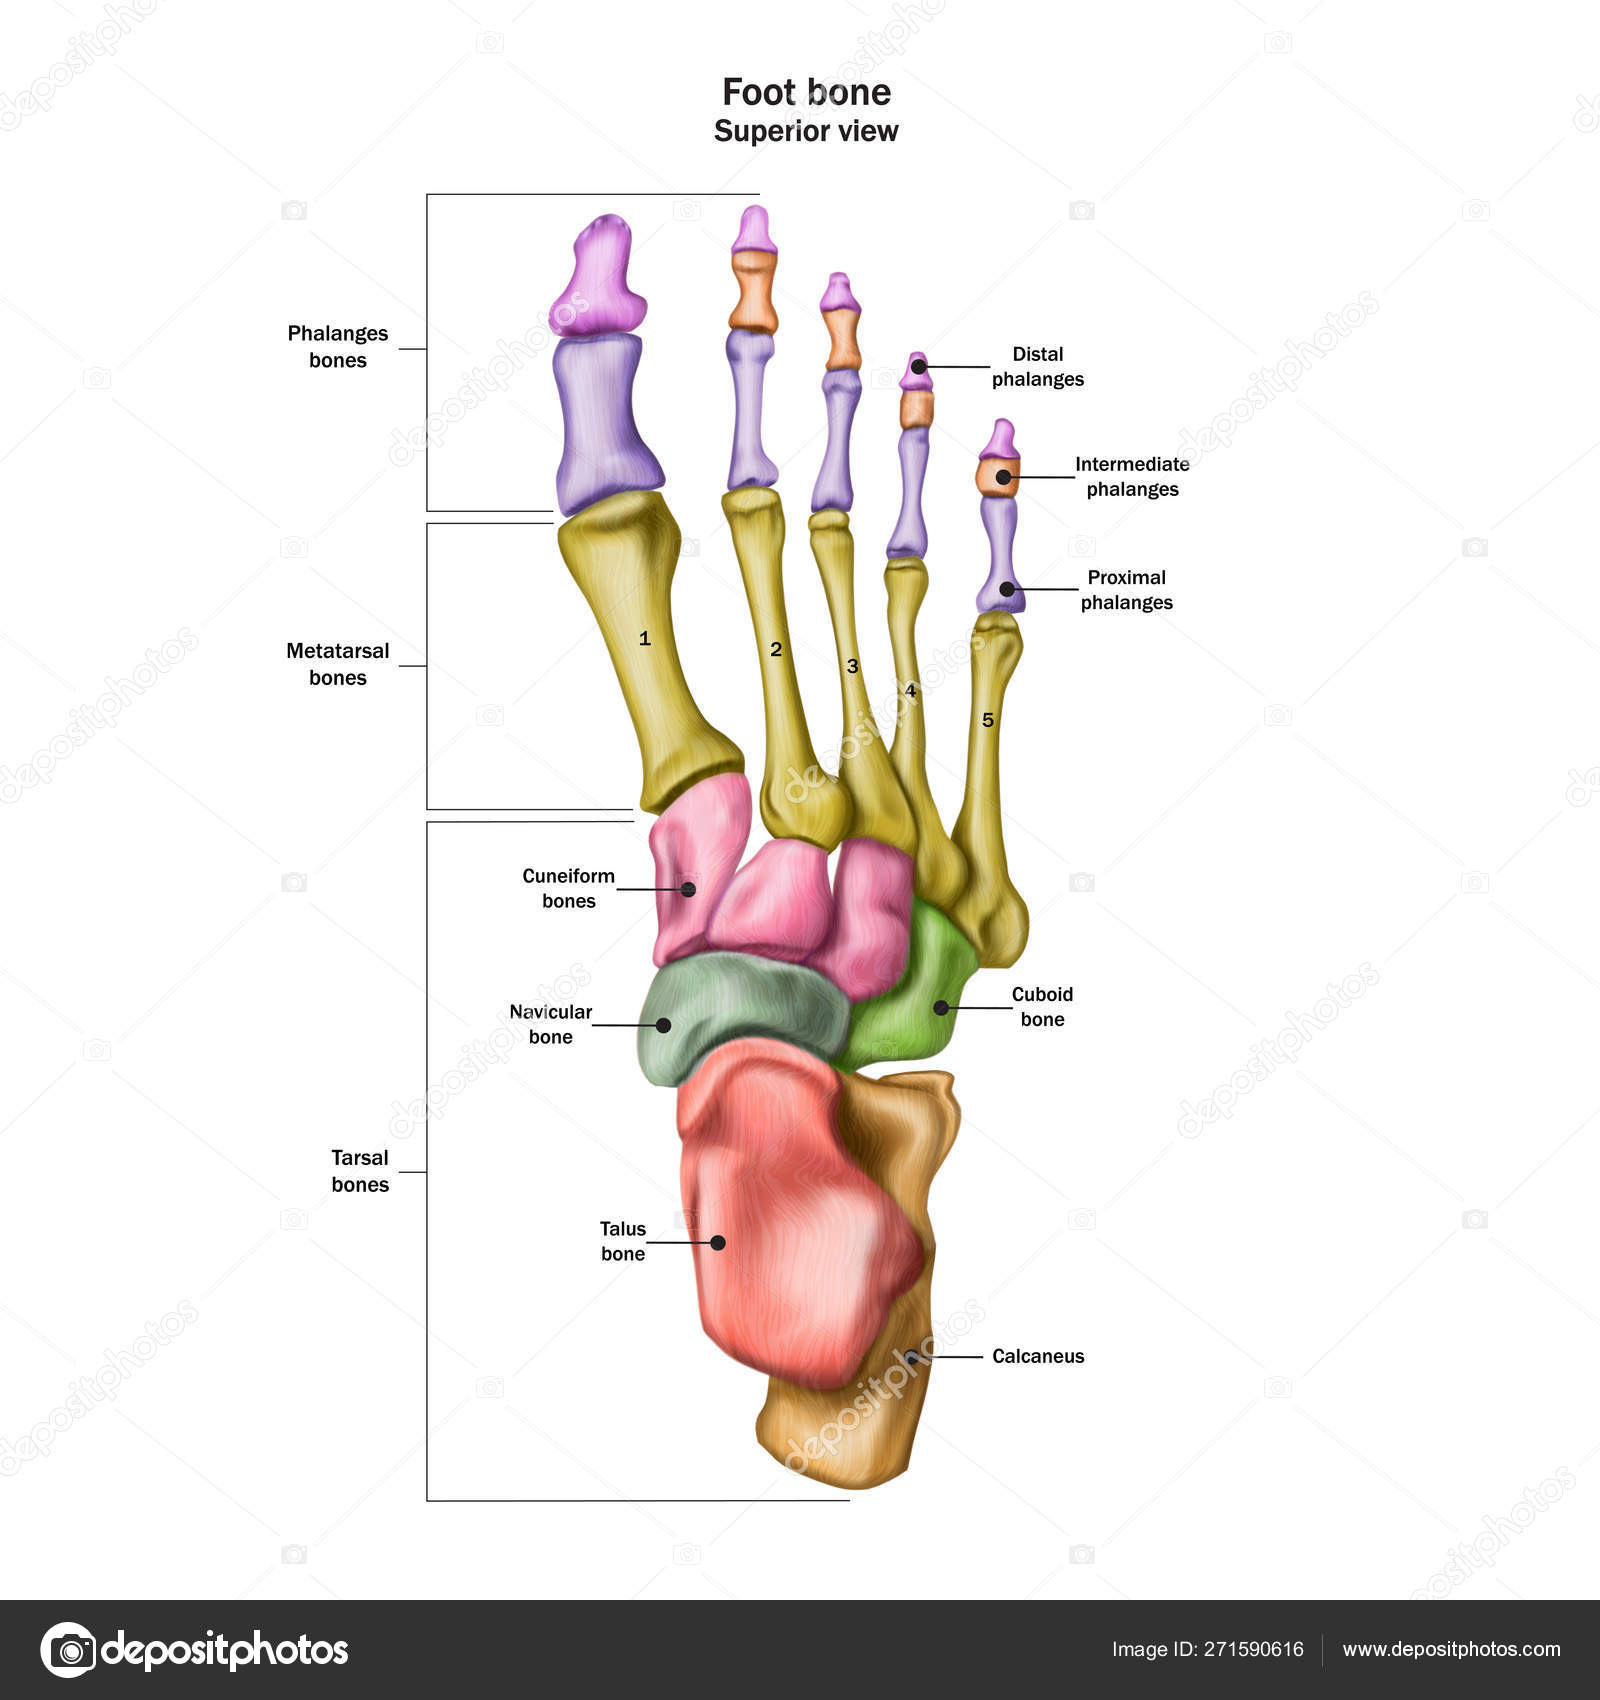 Foot Bones Diagram Bones Of The Human Foot With The Name And Description Of All Sit